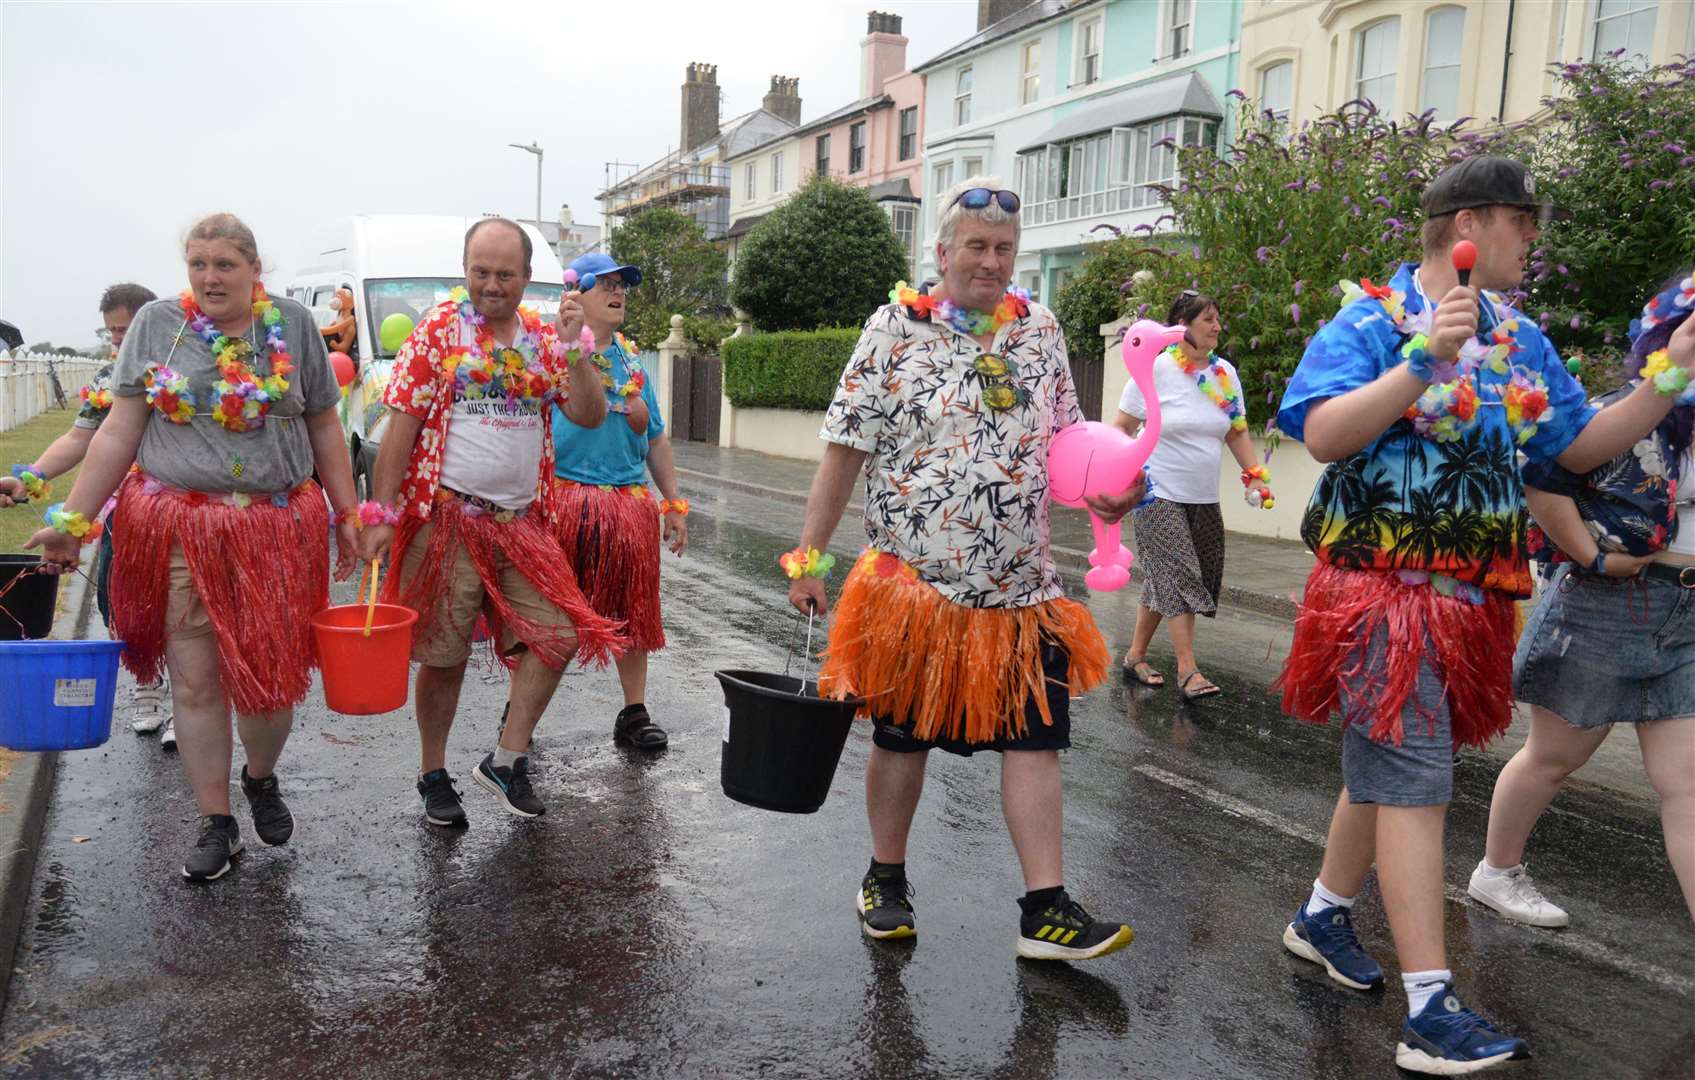 Carnival week returns to Deal this month. Picture: Chris Davey